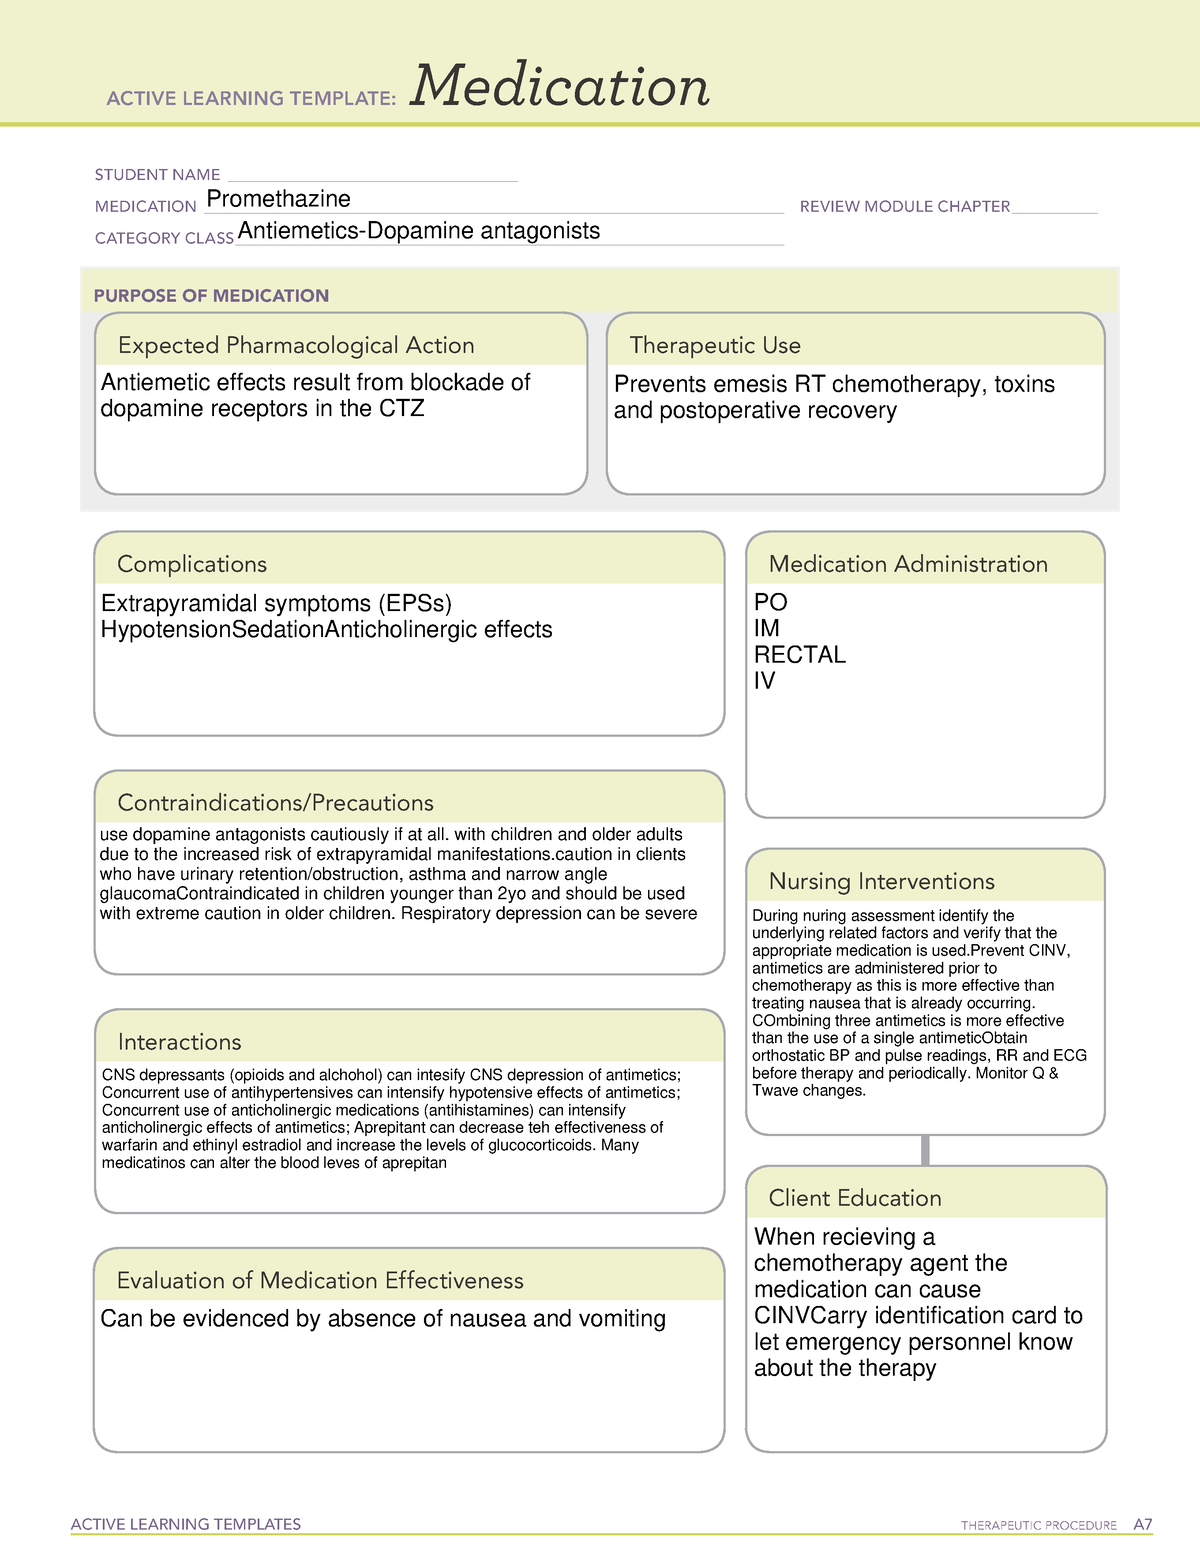 active-learning-template-medication-12-prom-active-learning